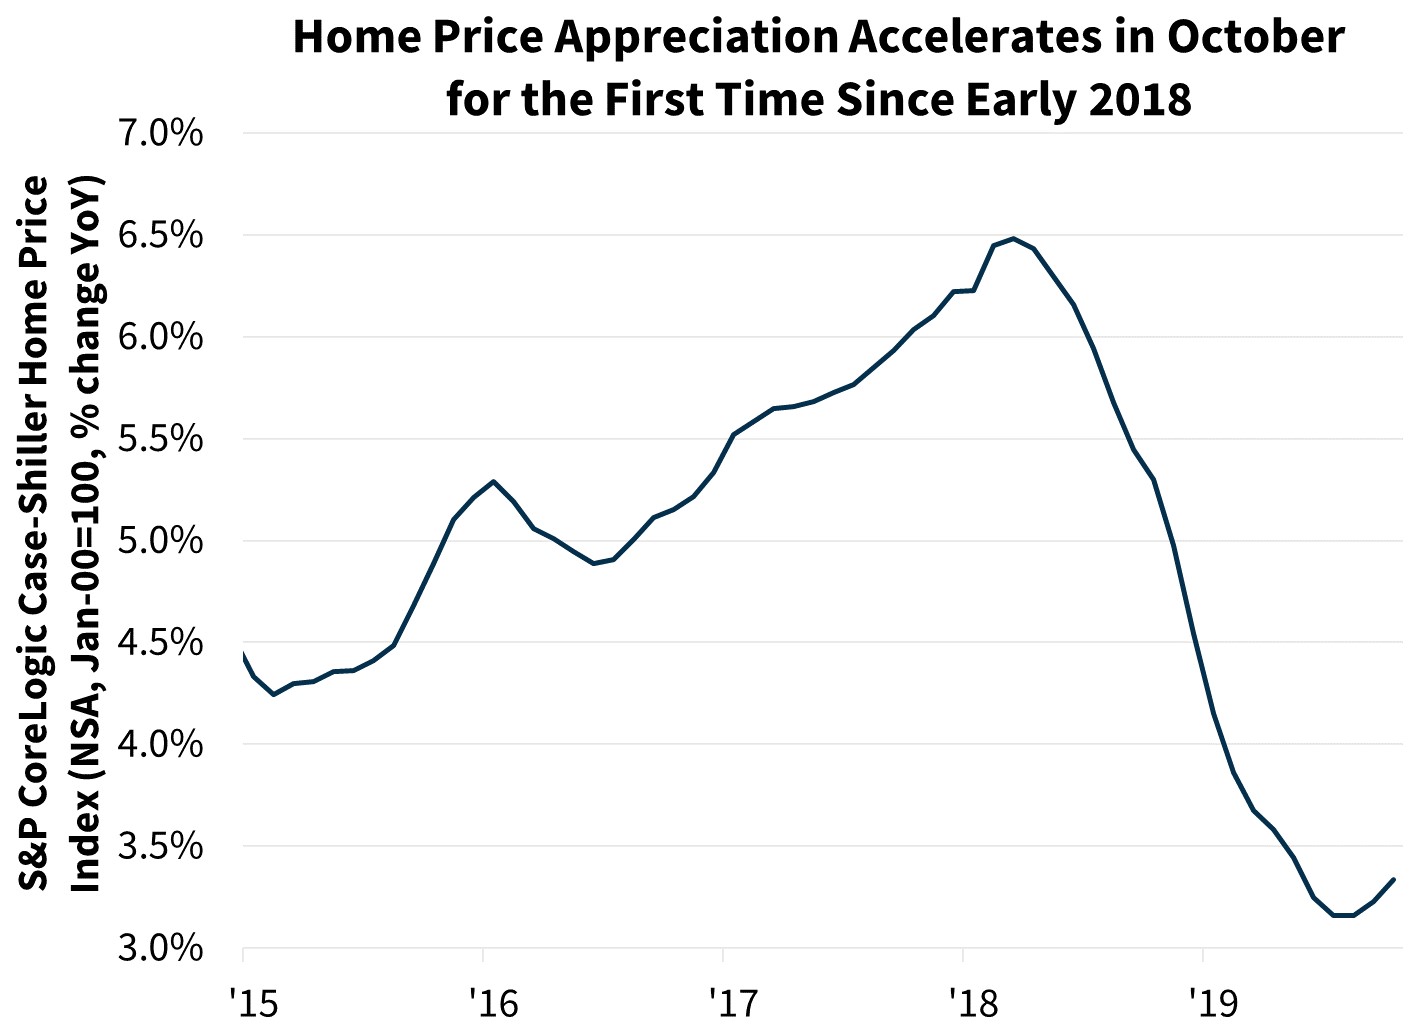 Home Price Appreciation Accelerates in October for the First Time Since Early 2008